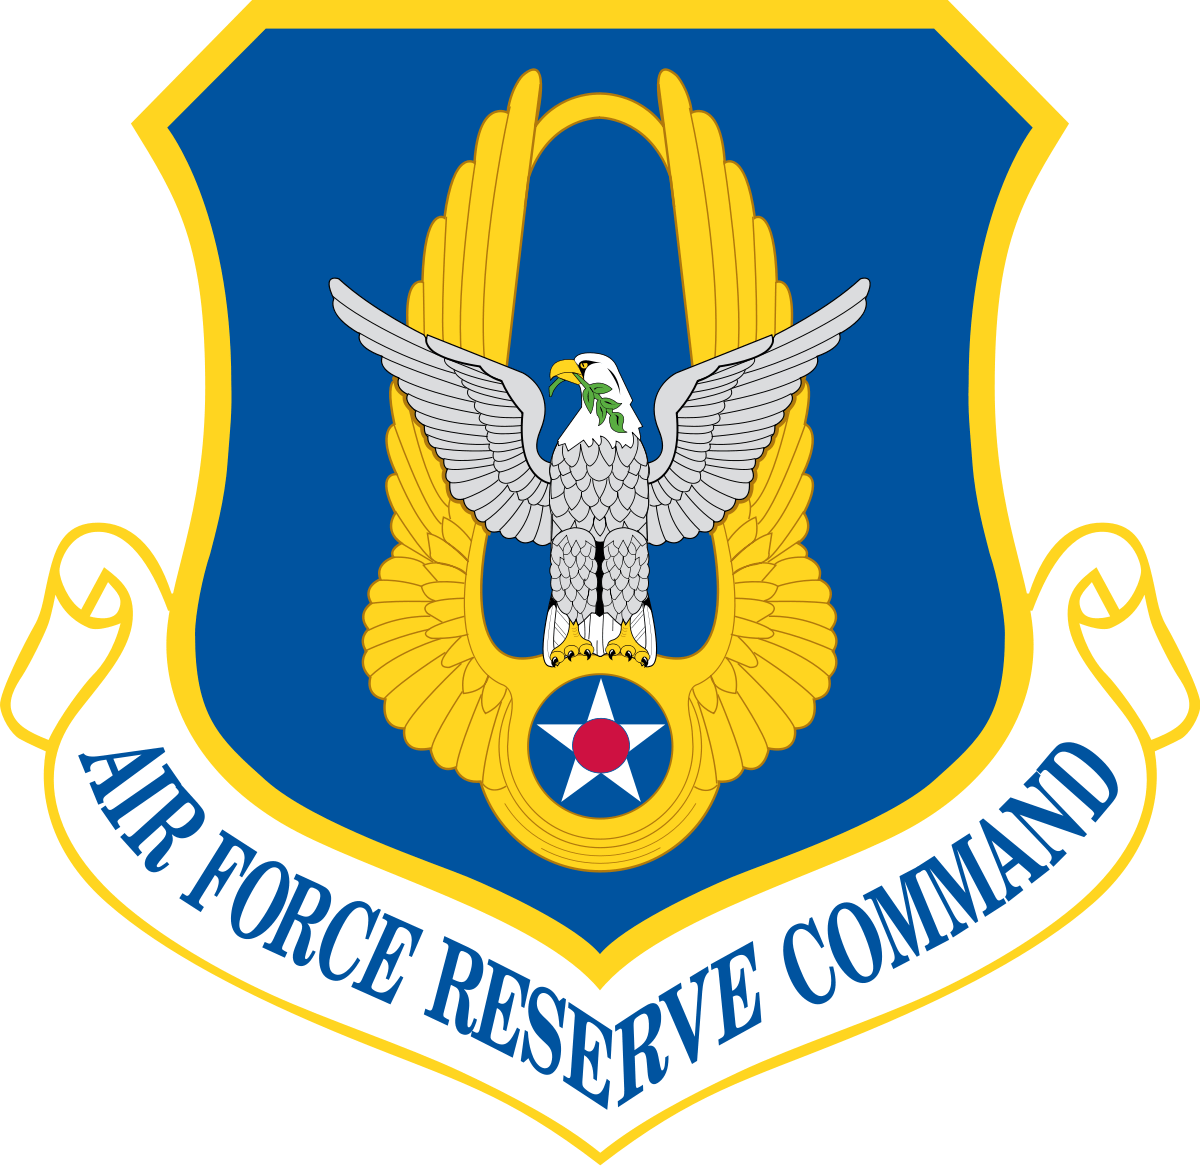 Air Force Reserve - Air Force Reserve Command (1200x1166)